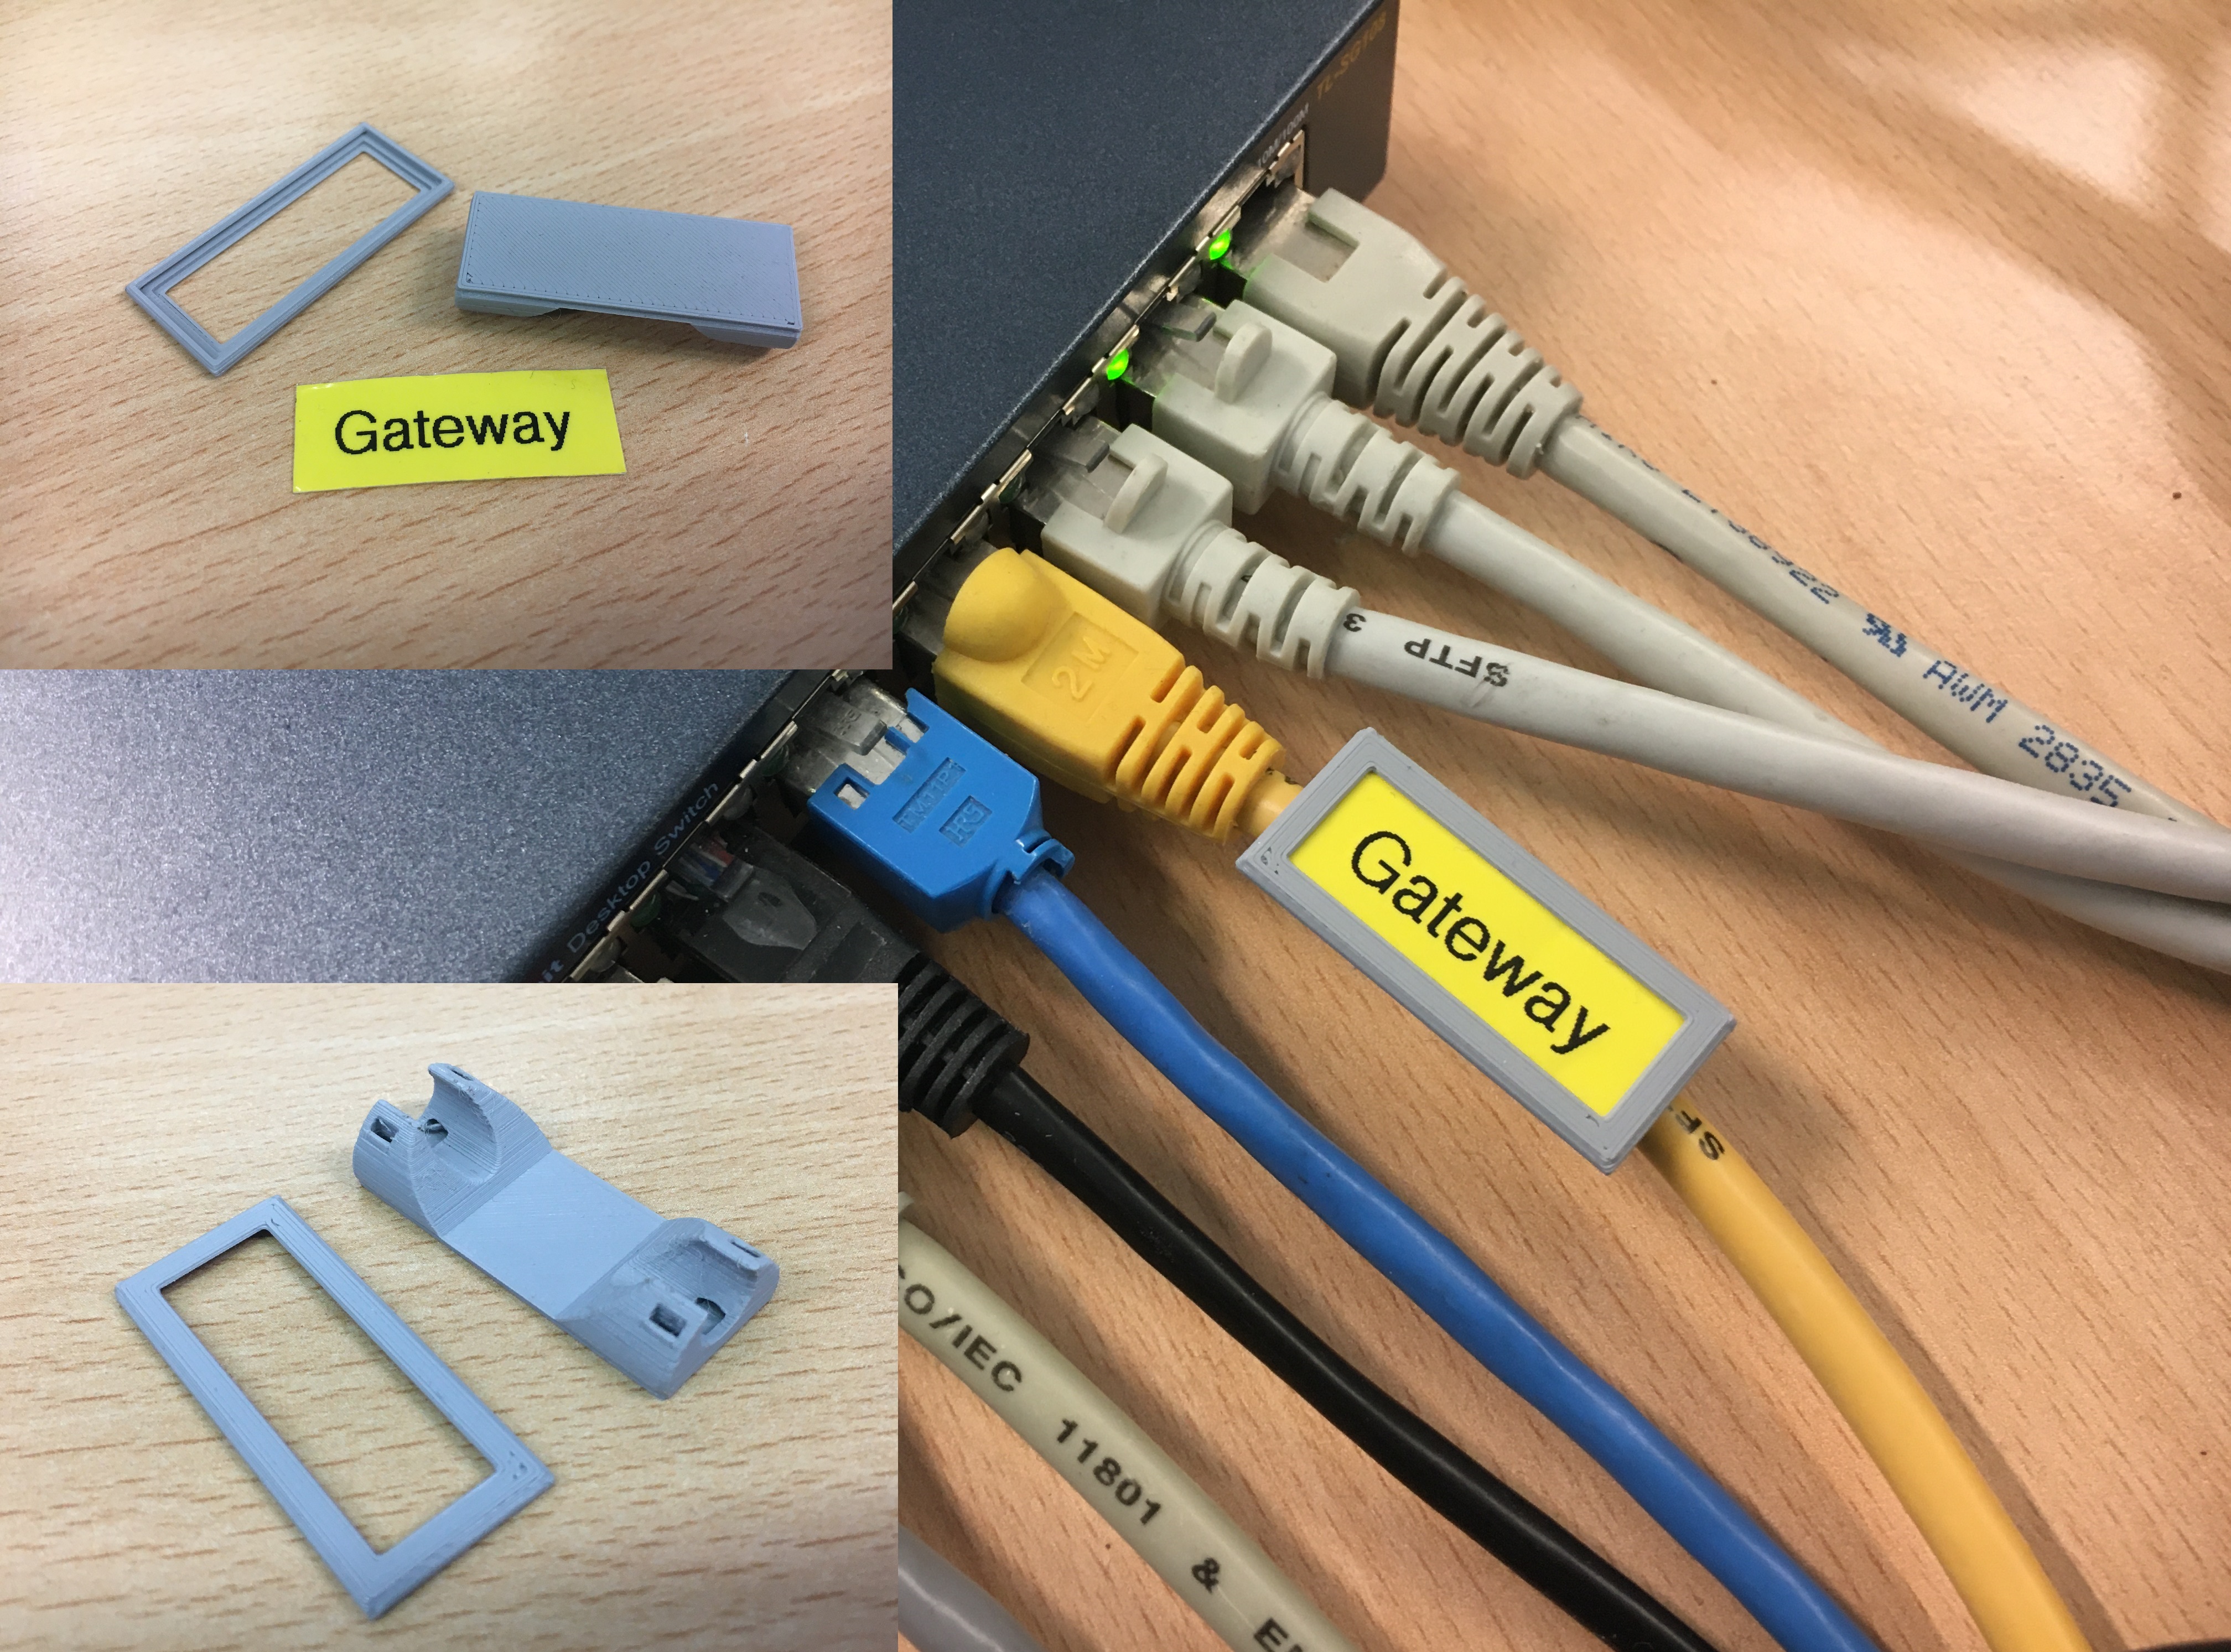 Parametric Cable Label / Tag holder for Ethernet, network, USB, PC, power line cables, etc.